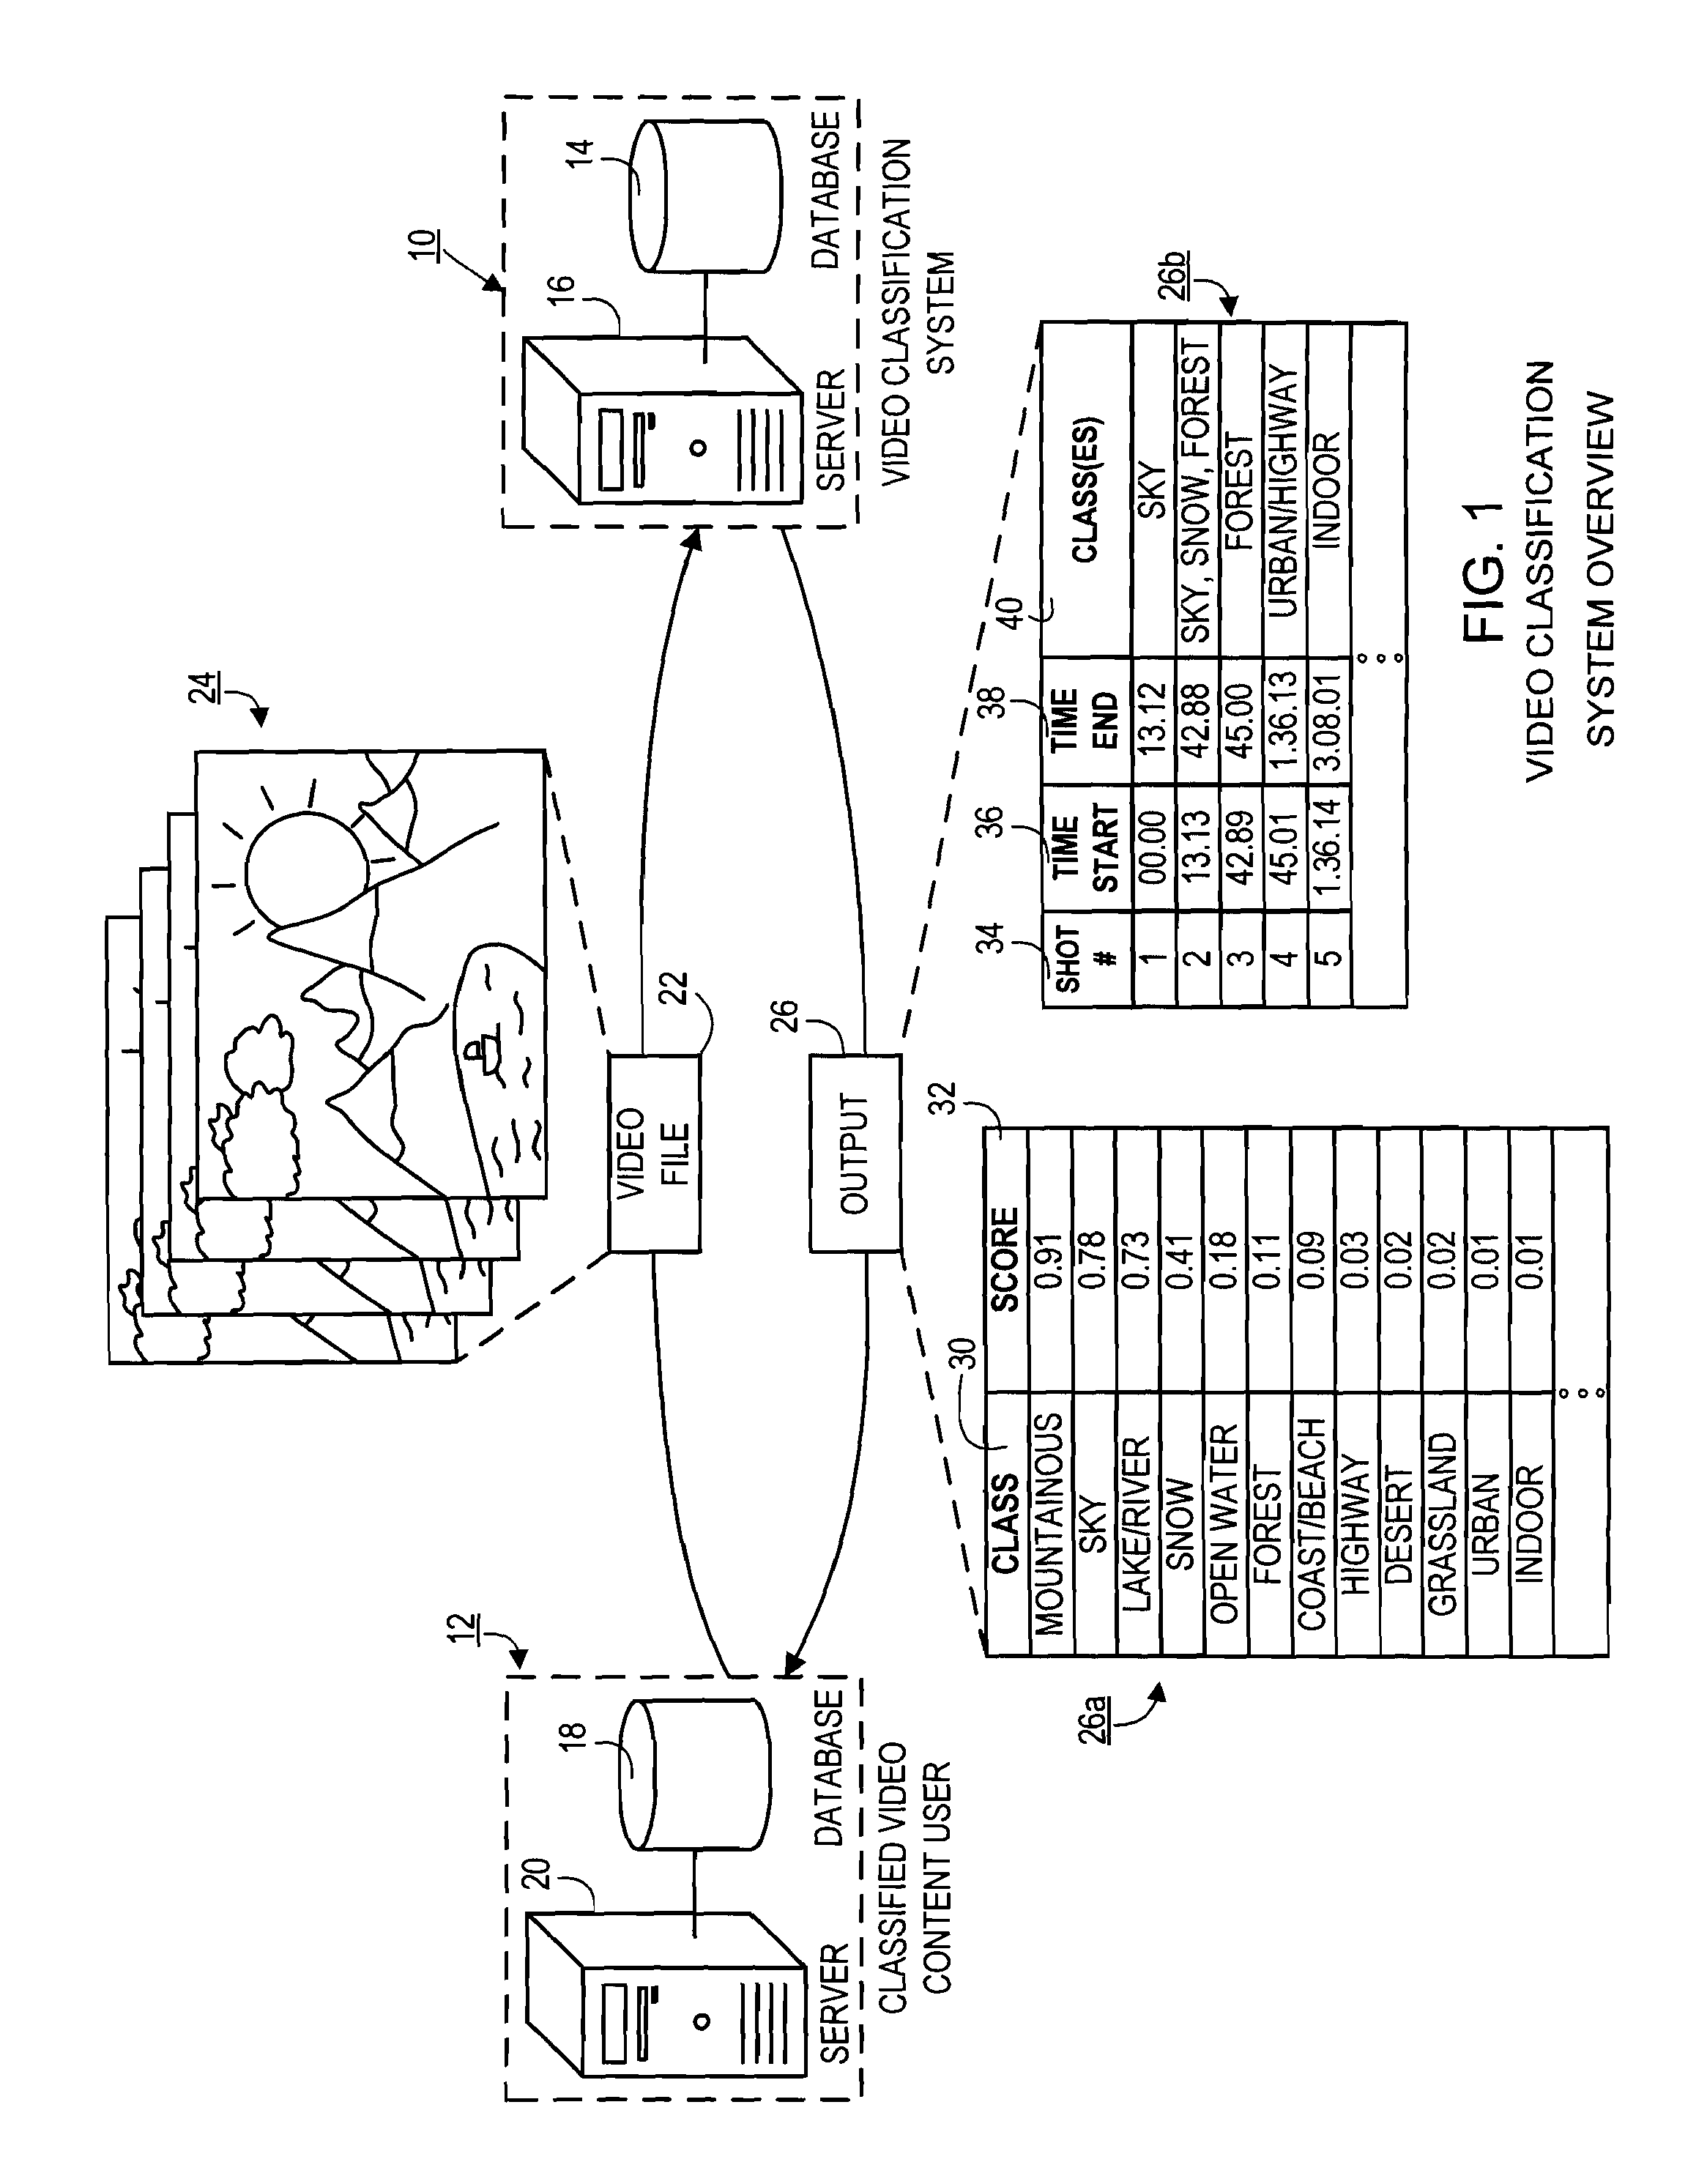 Systems and Methods for Semantically Classifying and Extracting Shots in Video